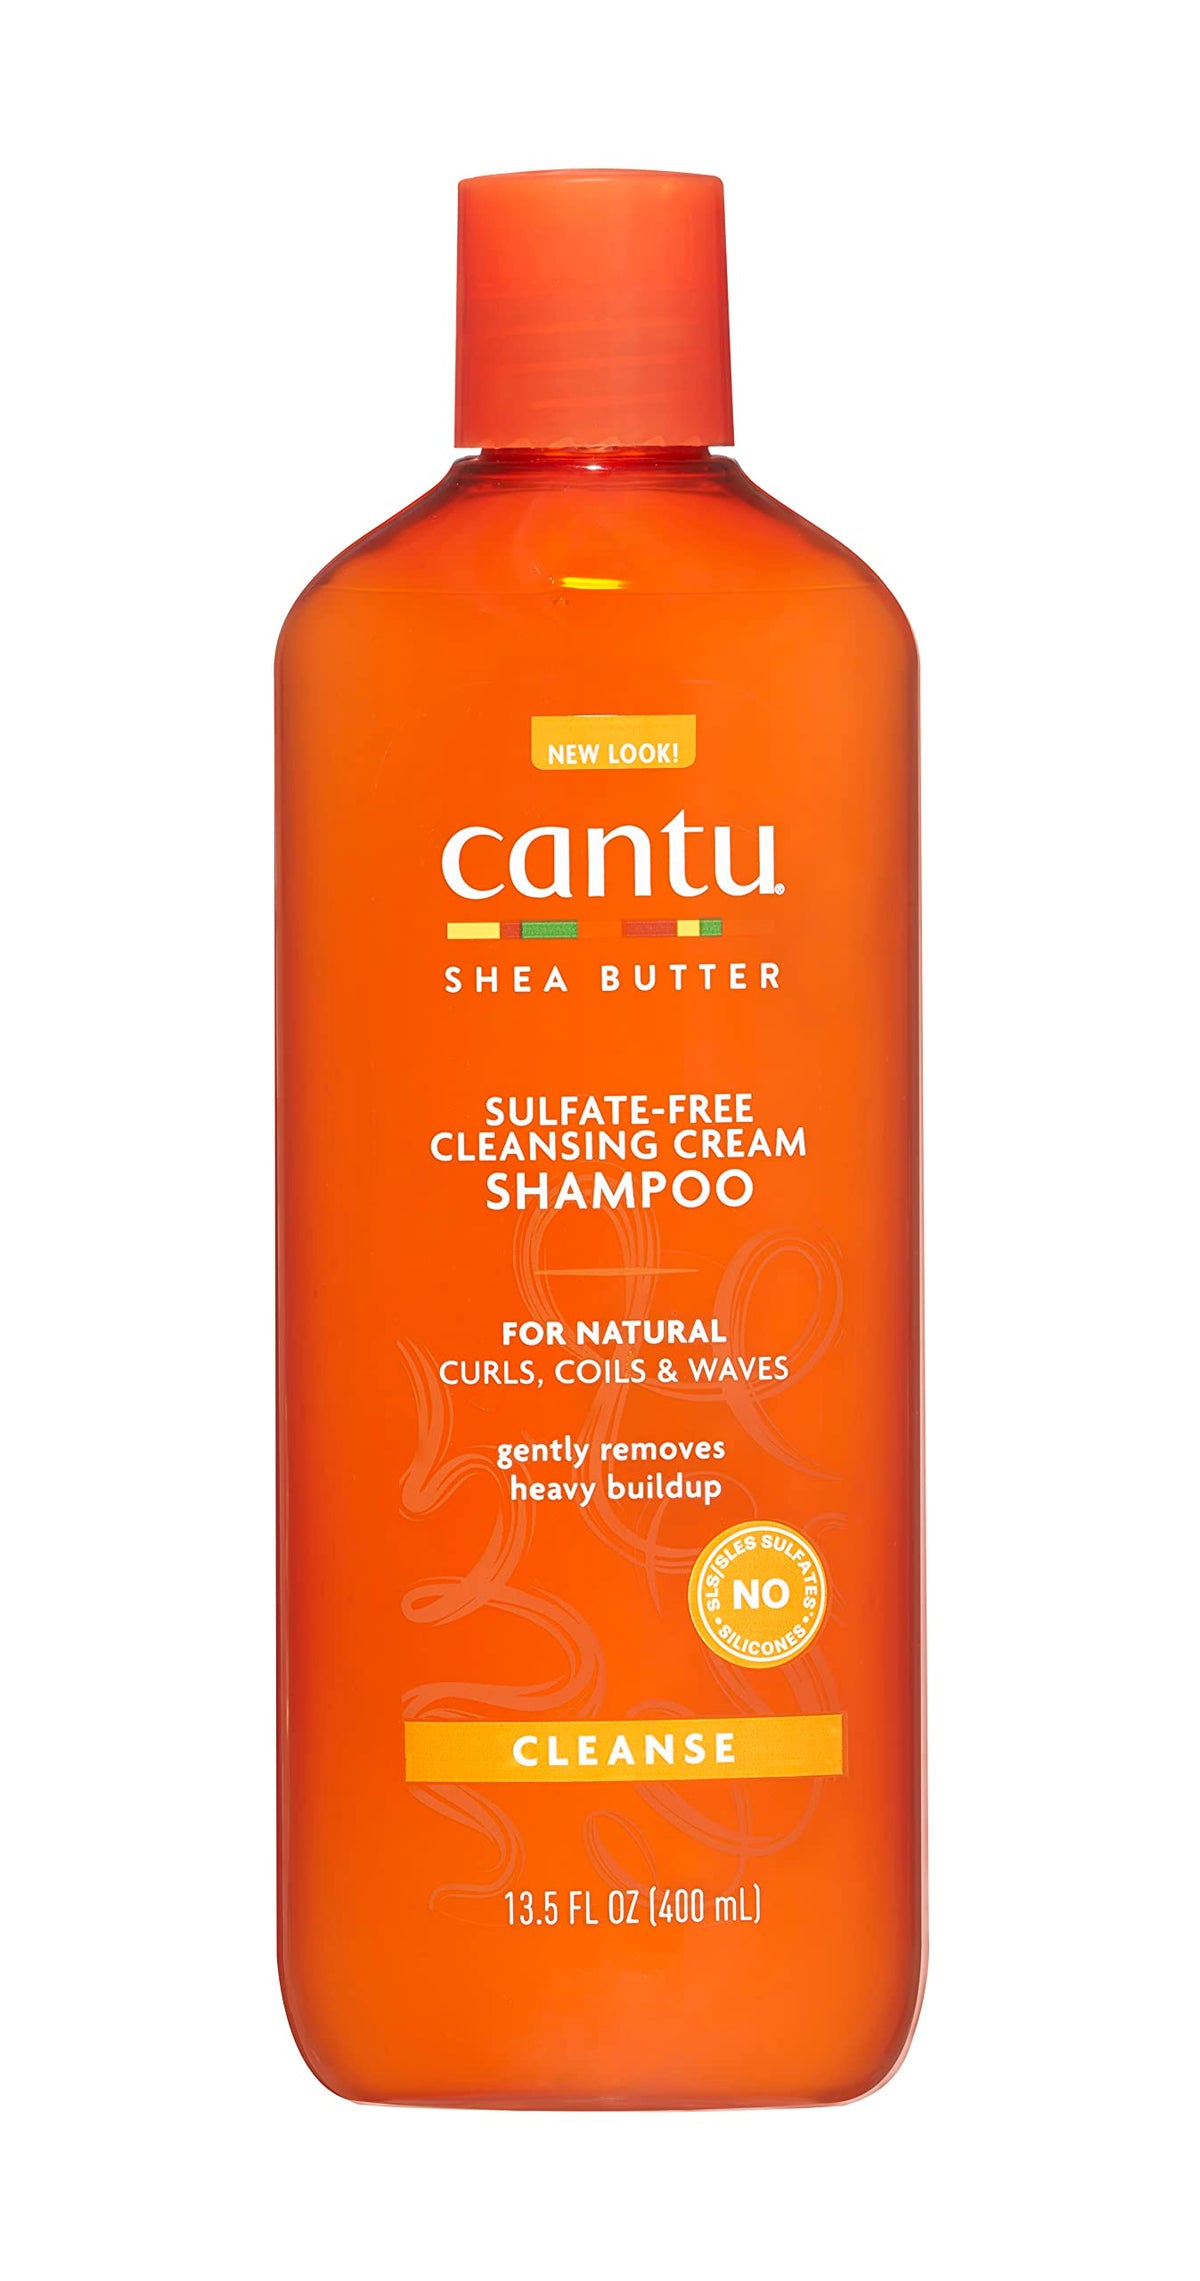 Cantu Sulfate-Free Cleansing Cream Shampoo with Shea Butter for Natural Hair - 400ml